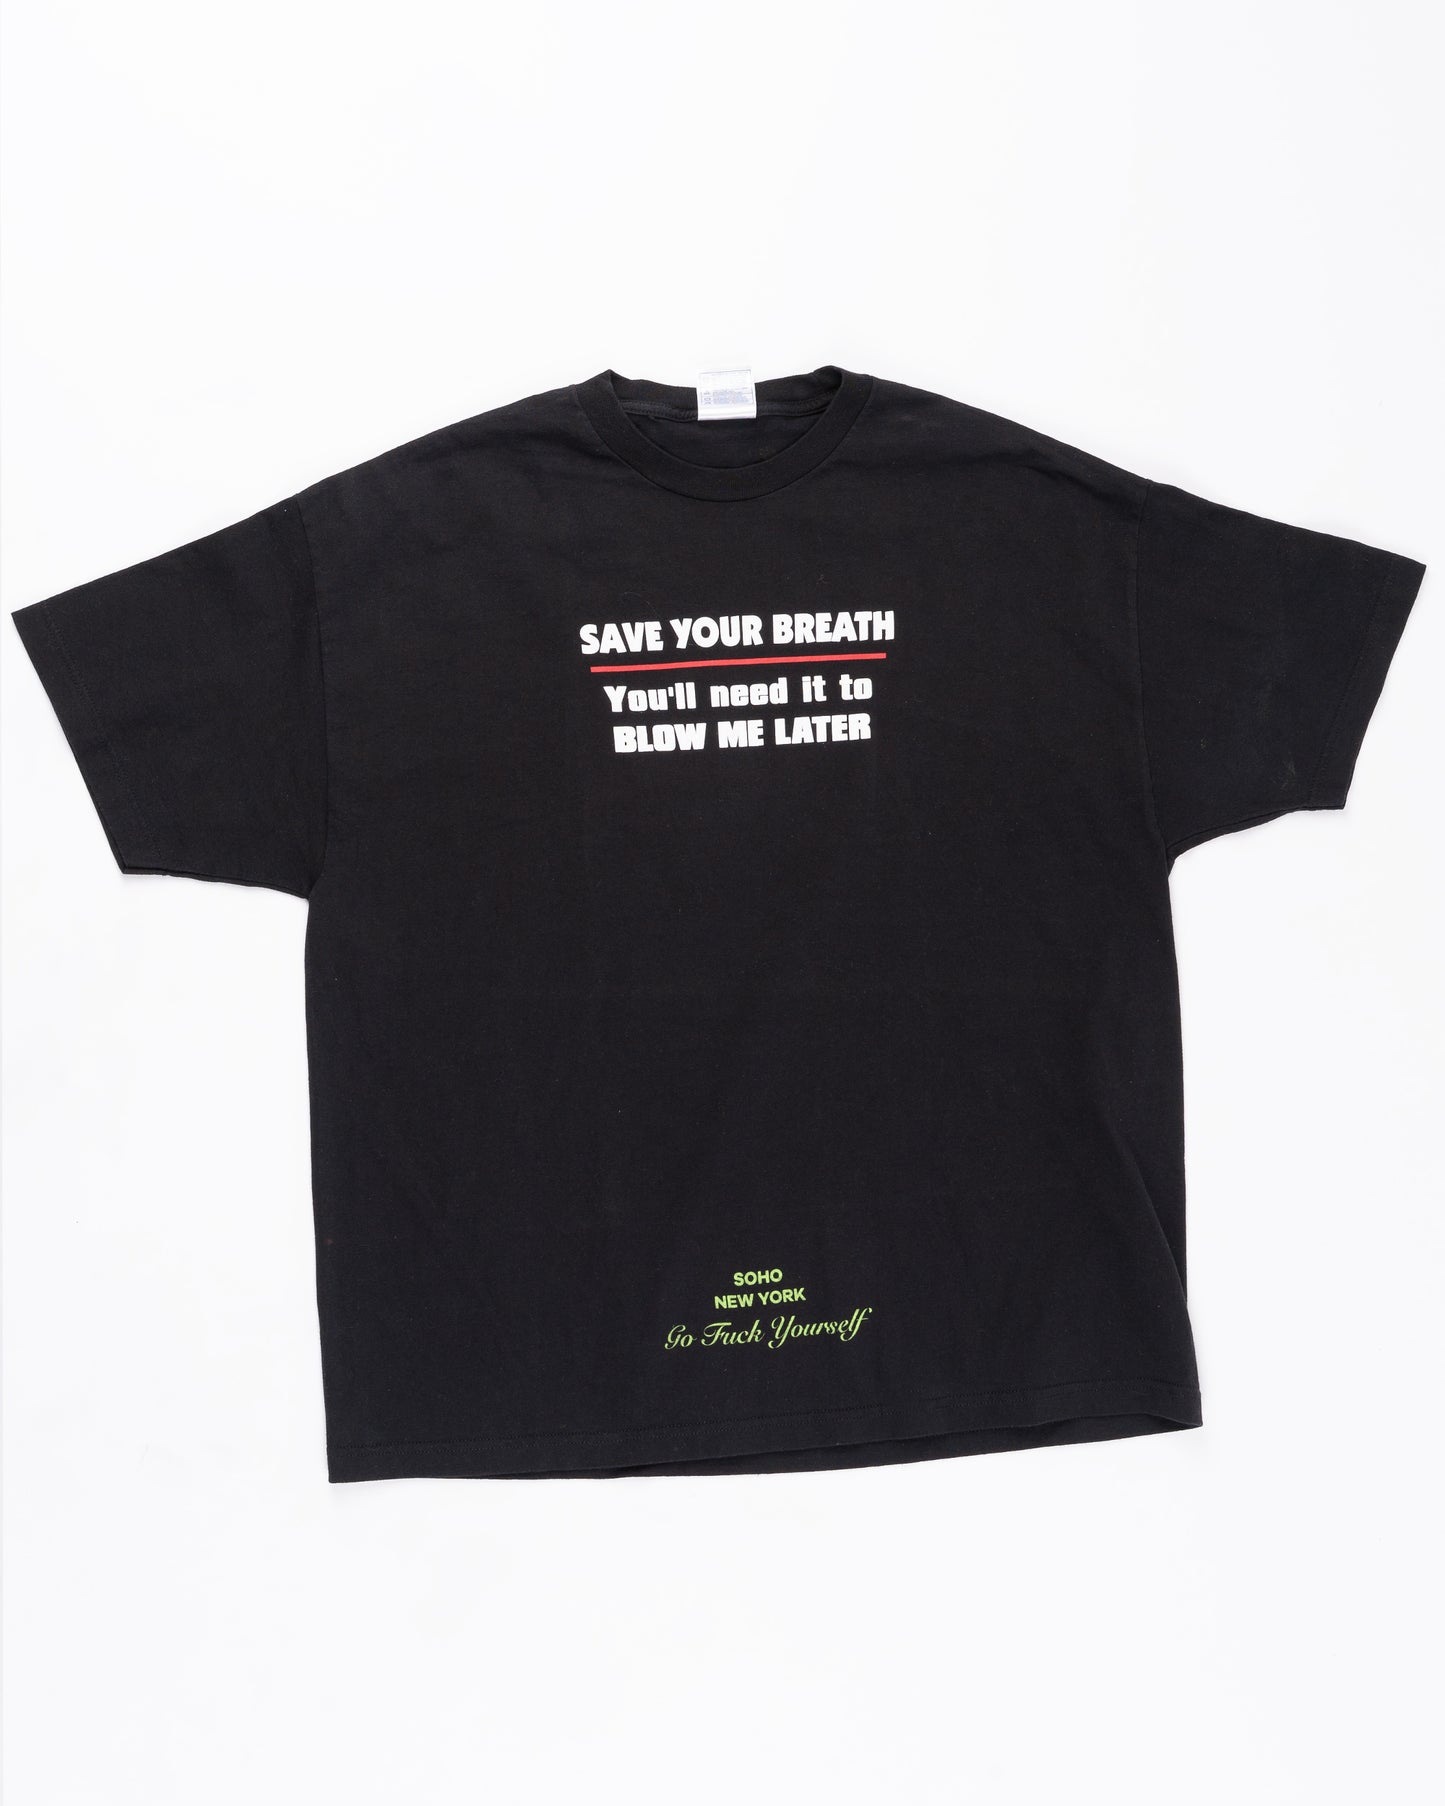 Save Your Breath T-Shirt Size: 2XLarge